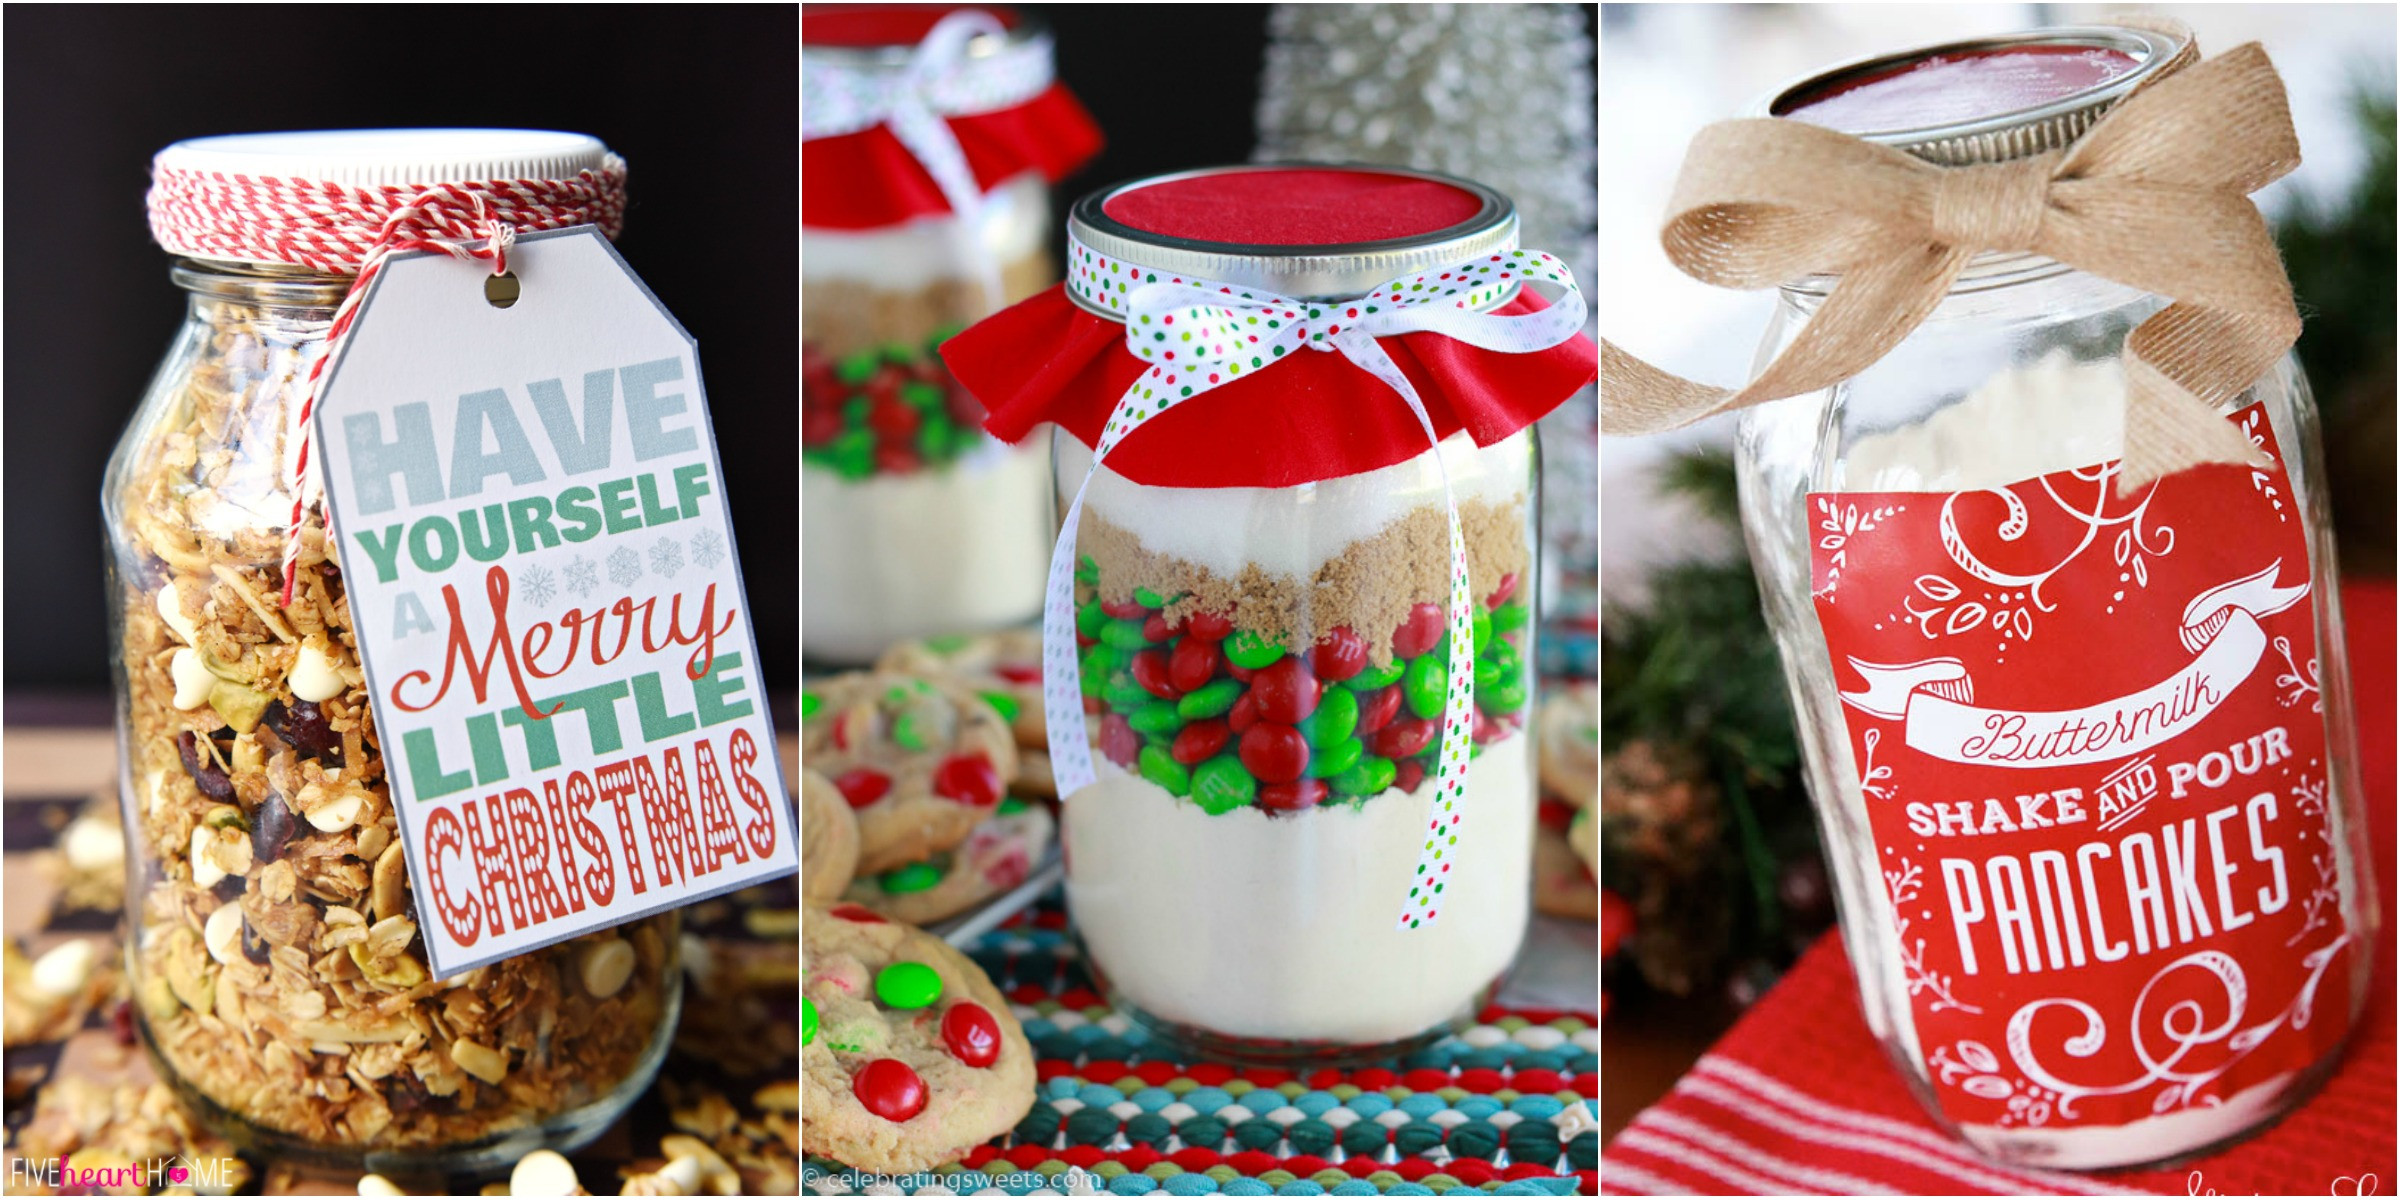 Best Food Gifts For Christmas
 34 Mason Jar Christmas Food Gifts – Recipes for Gifts in a